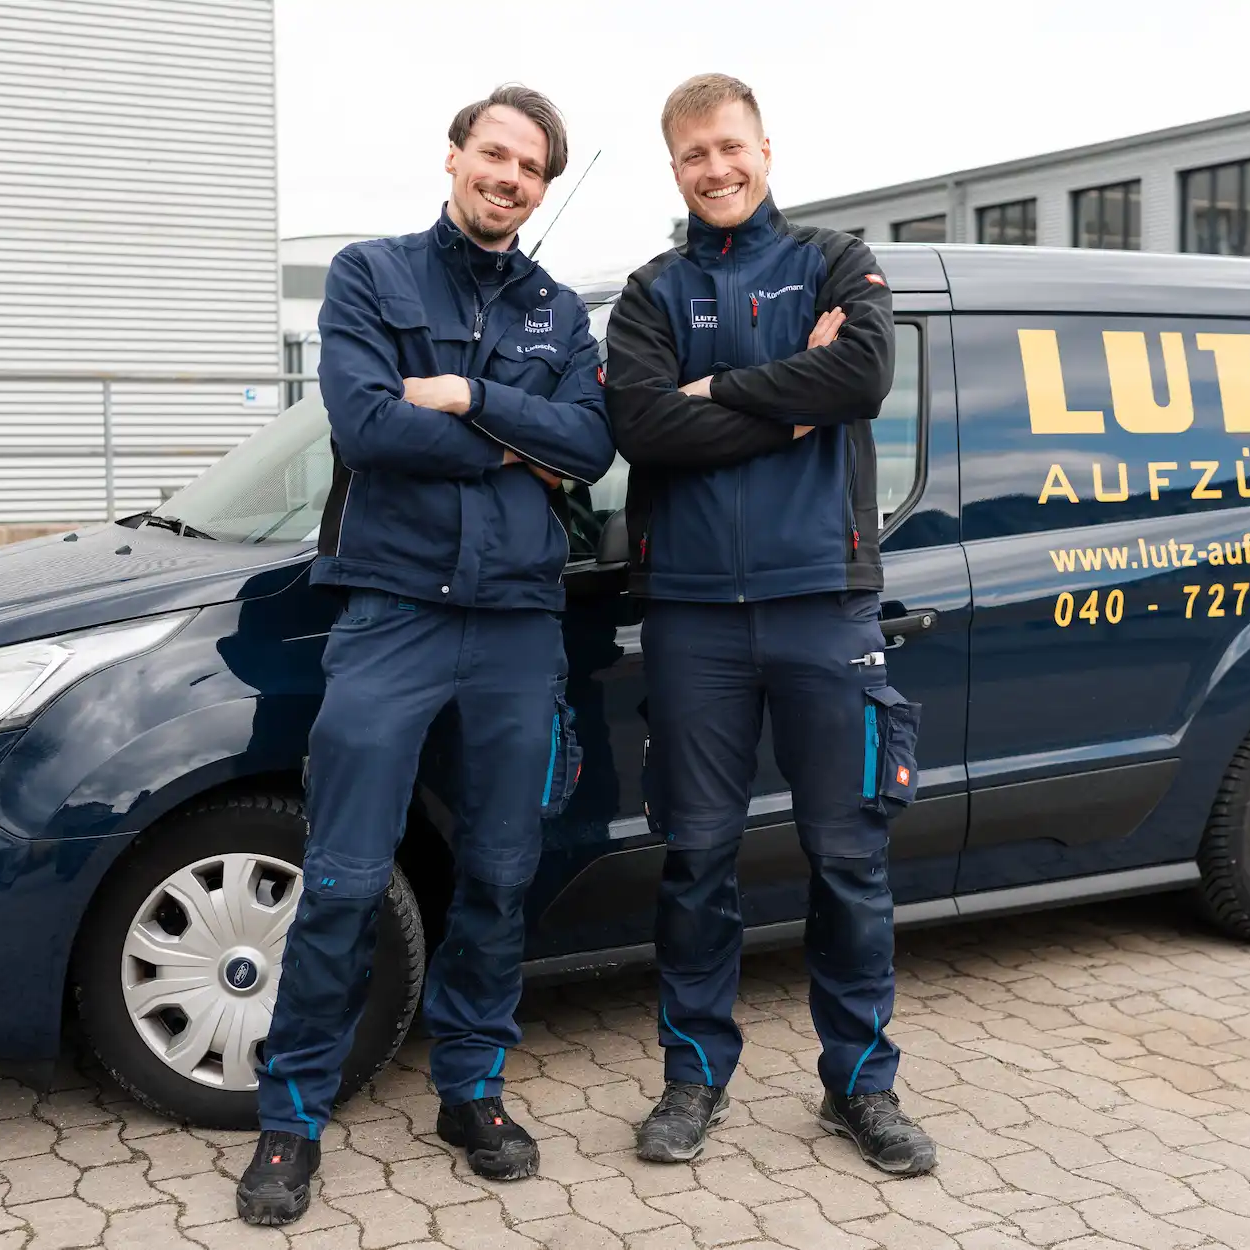 Two service technicians stand in front of LUTZ car